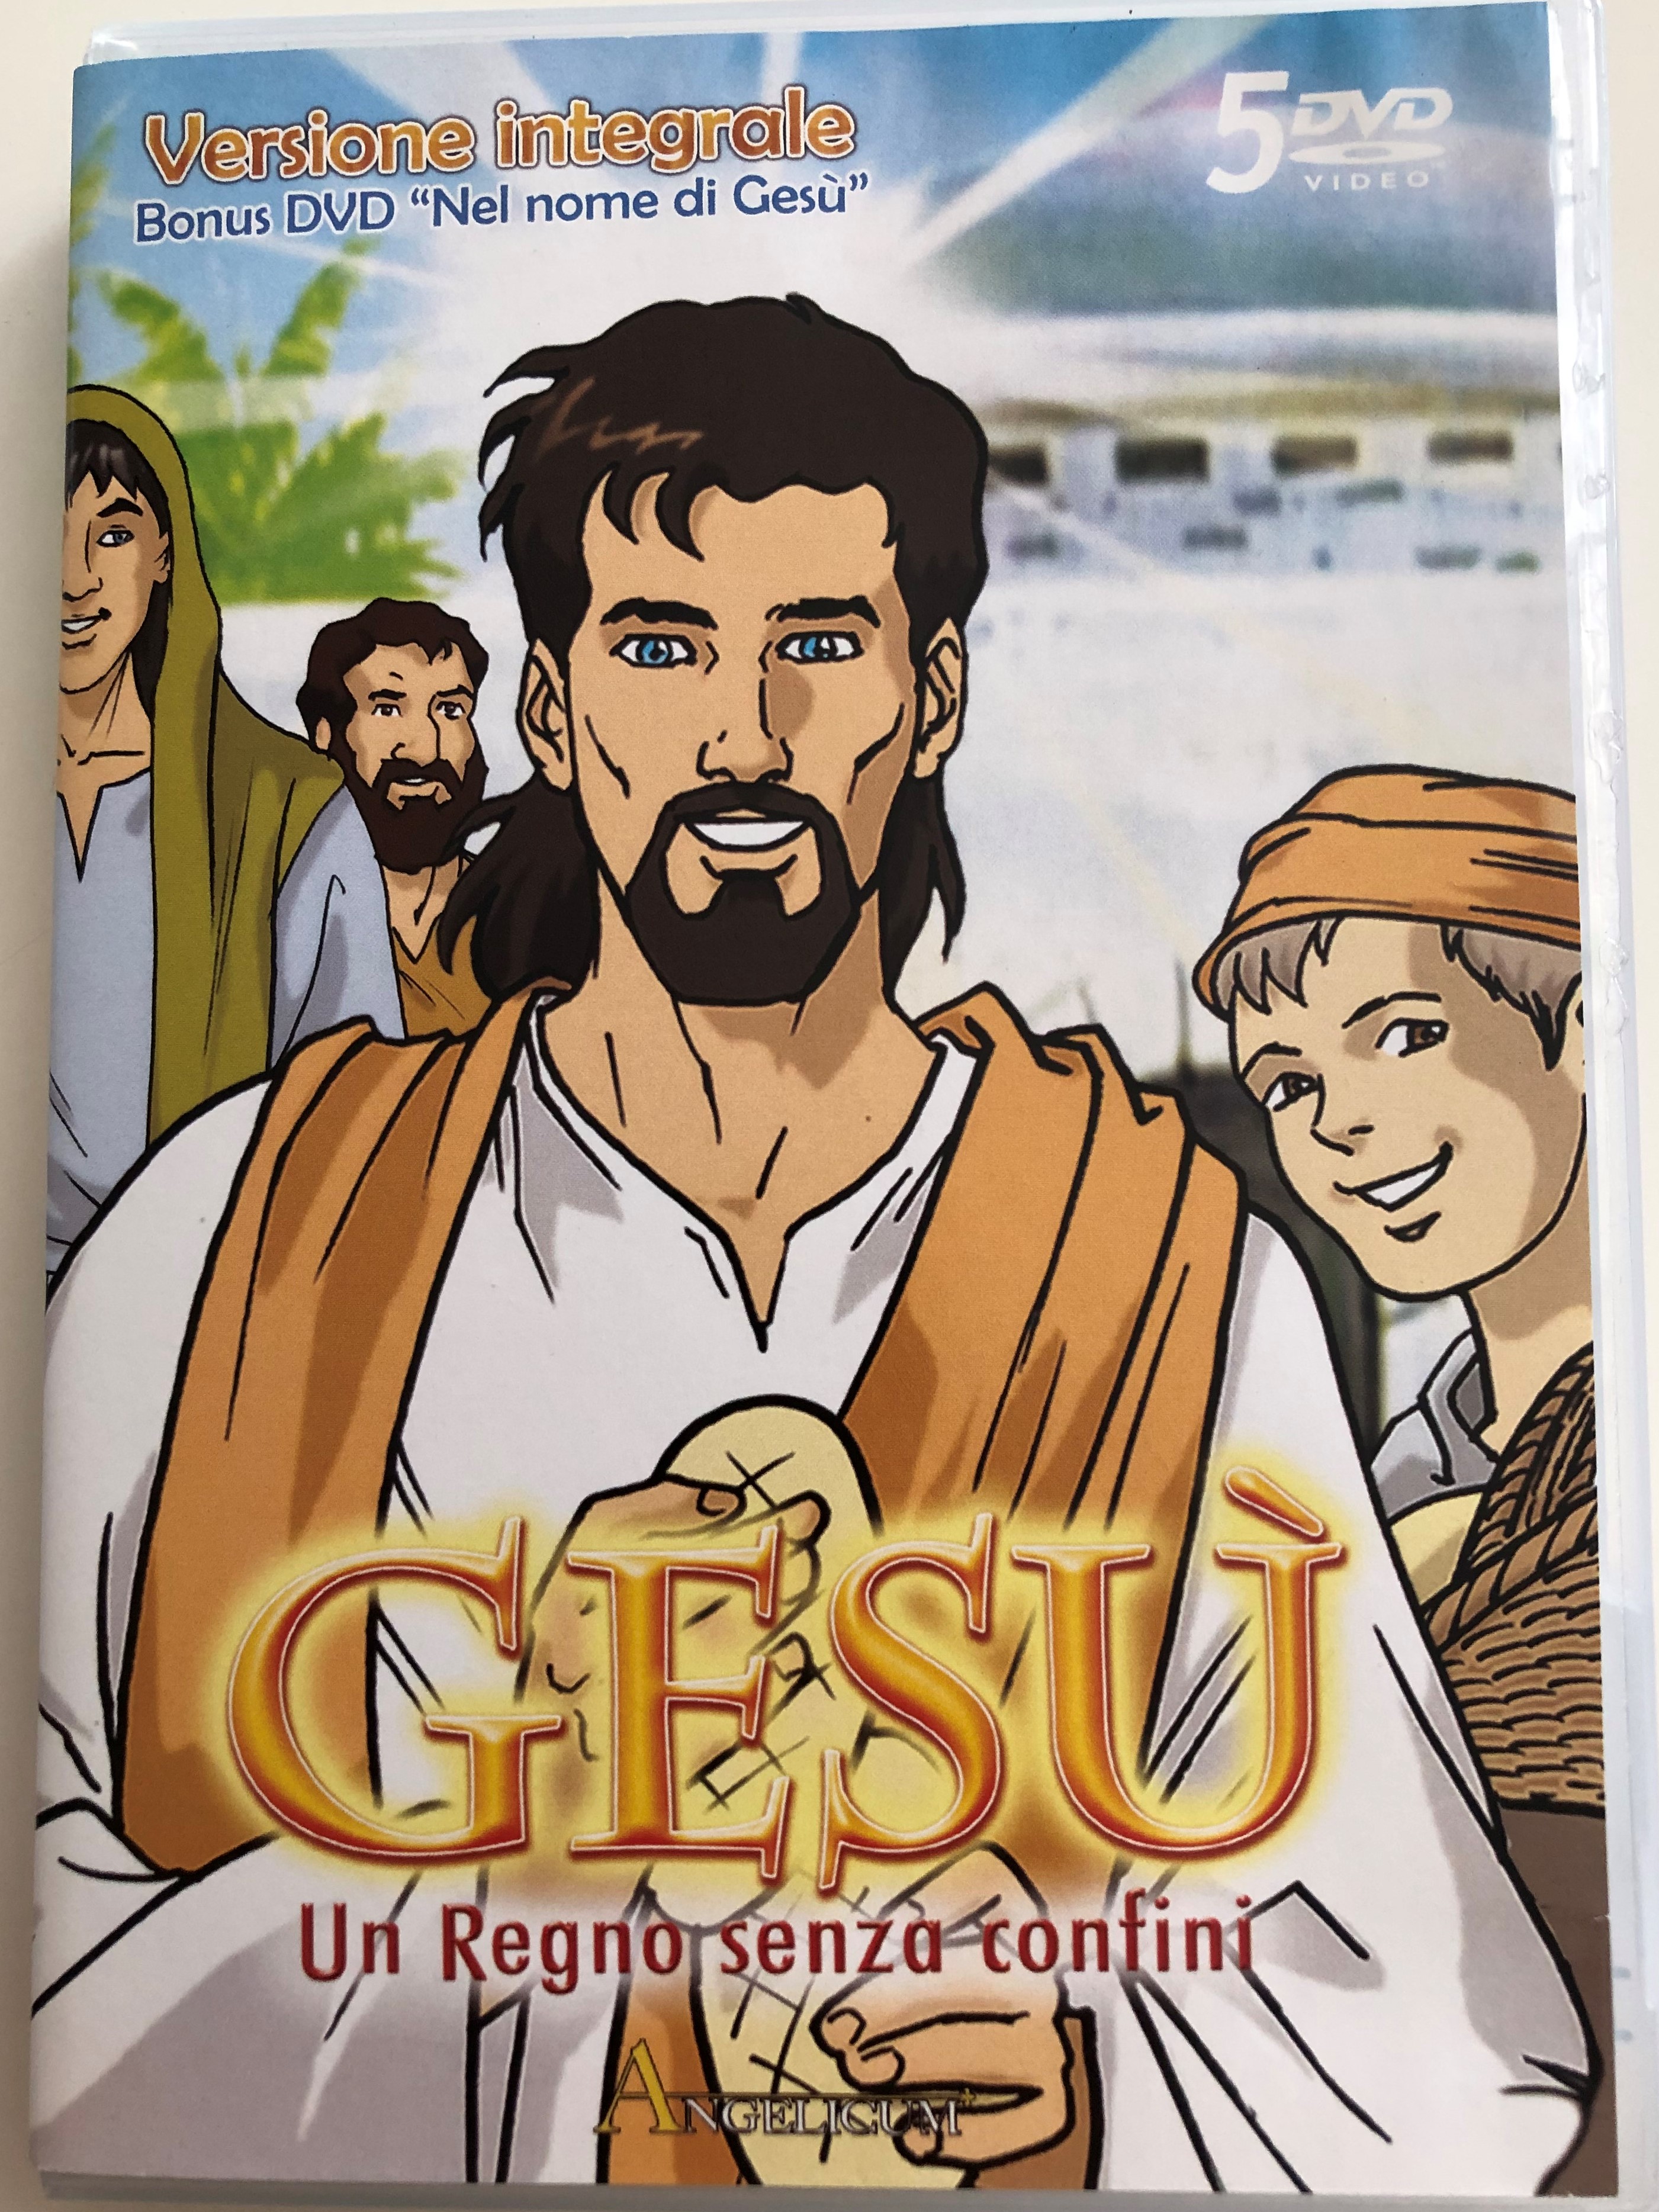 ges-un-regno-senza-confini-1998-5-dvd-set-jesus-a-kingdom-without-borders-directed-by-jung-soo-yong-italian-cartoon-series-full-version-versione-integrale-bonus-dvd-nel-nome-di-ges-in-the-name.jpg